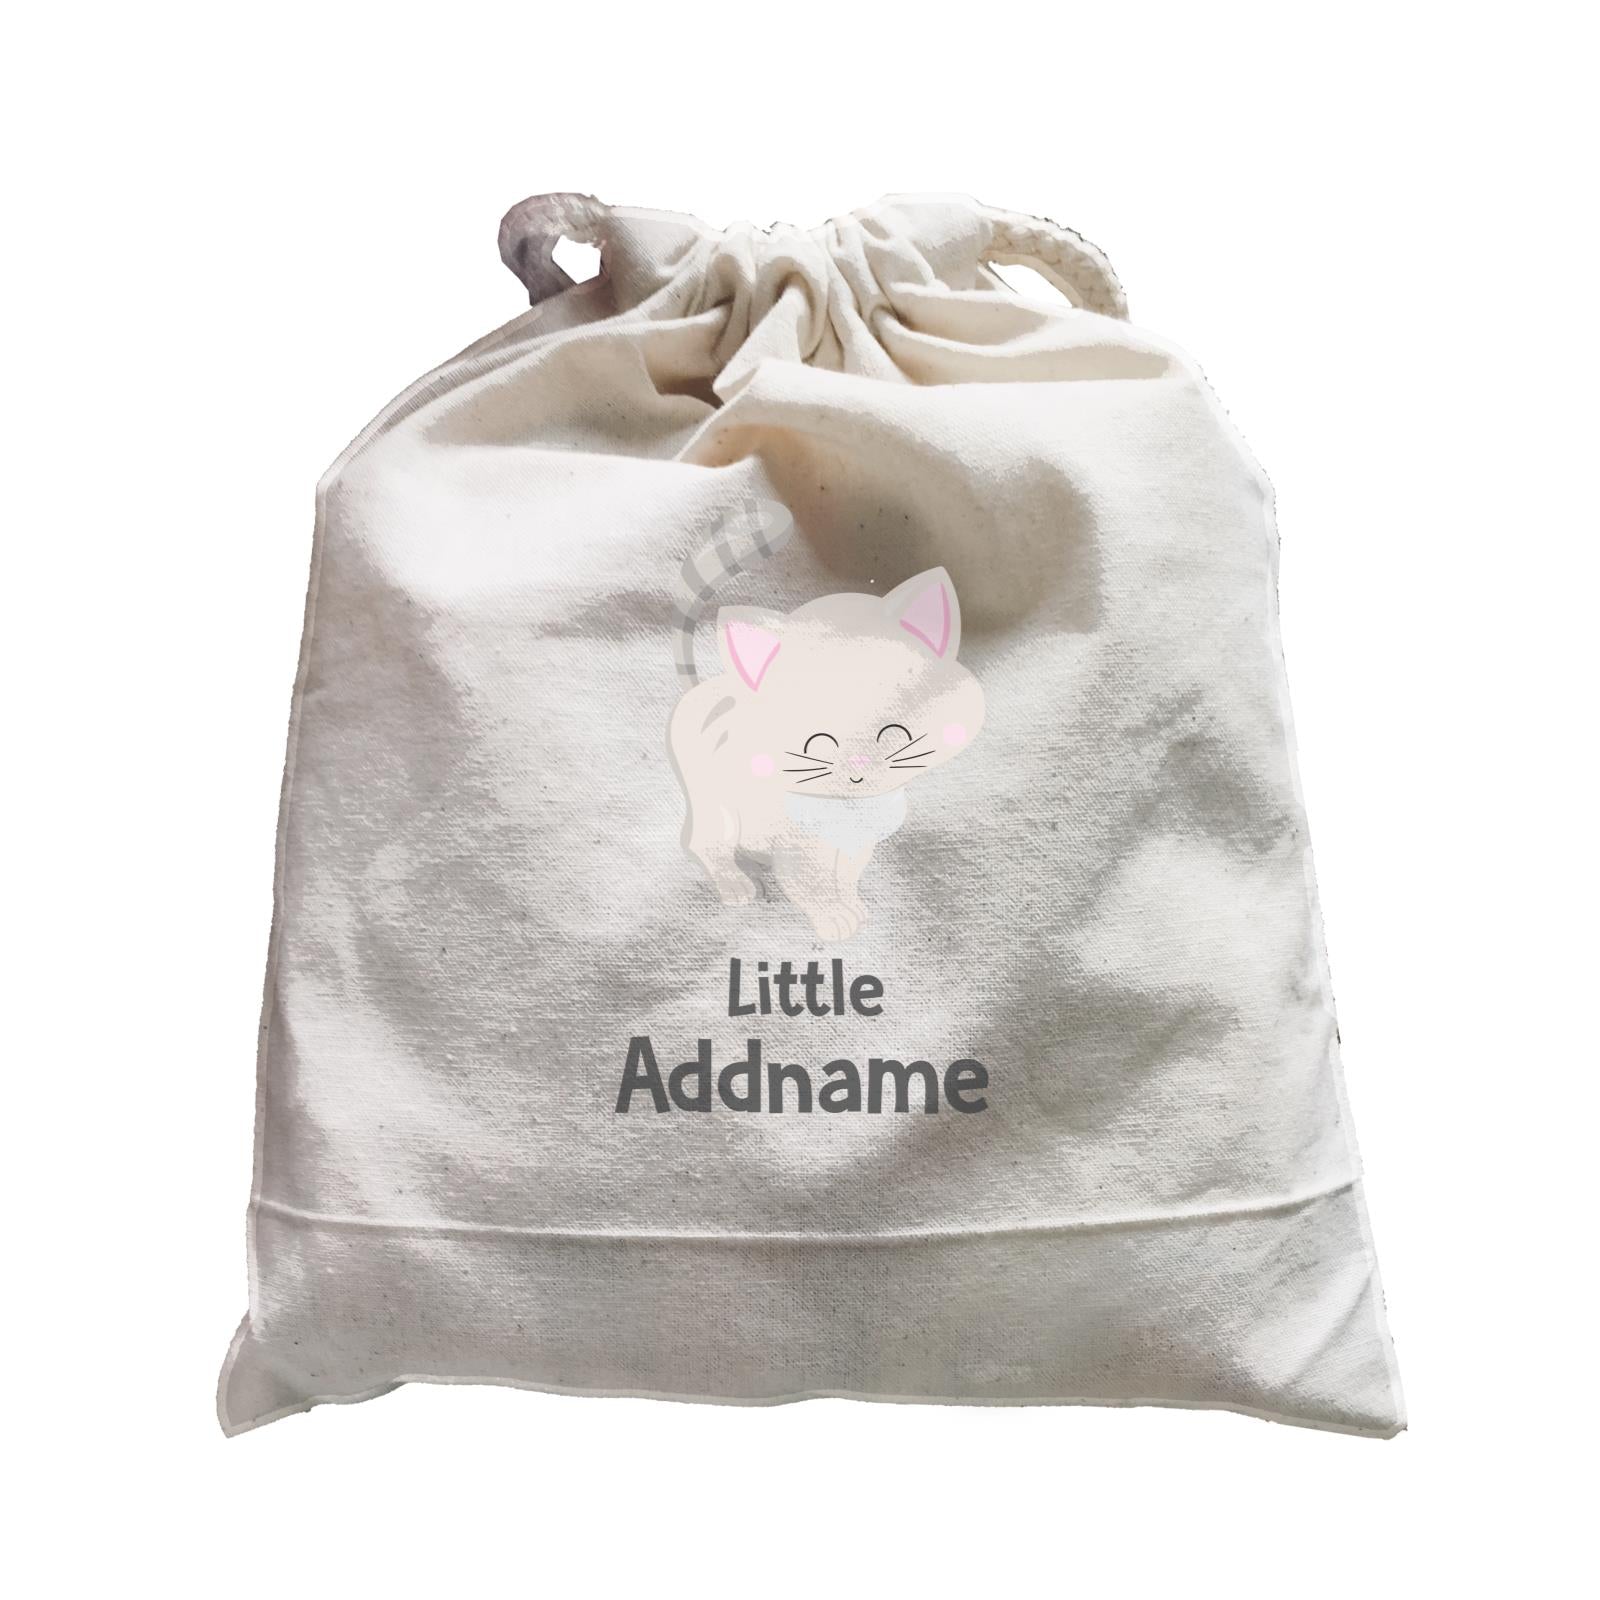 Adorable Cats White Cat Little Addname Satchel